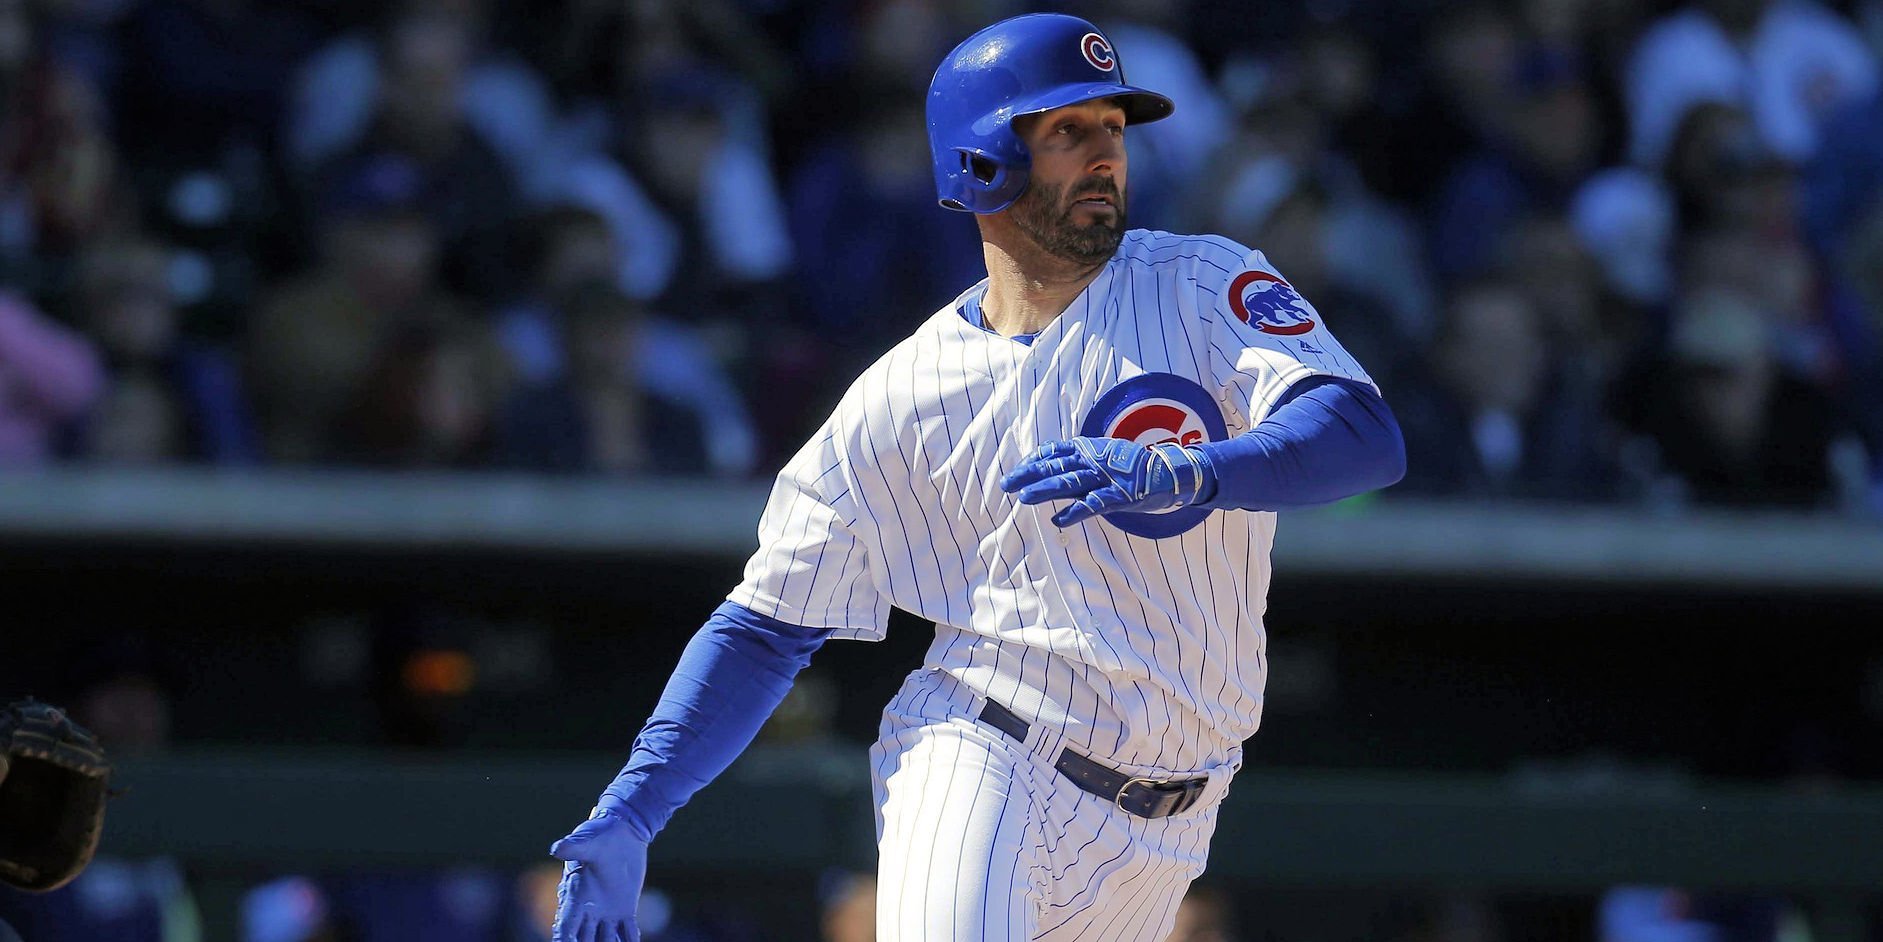 Down on Cubs Farm: Descalso homers for second straight game, SB keeps pace, Ems win, more